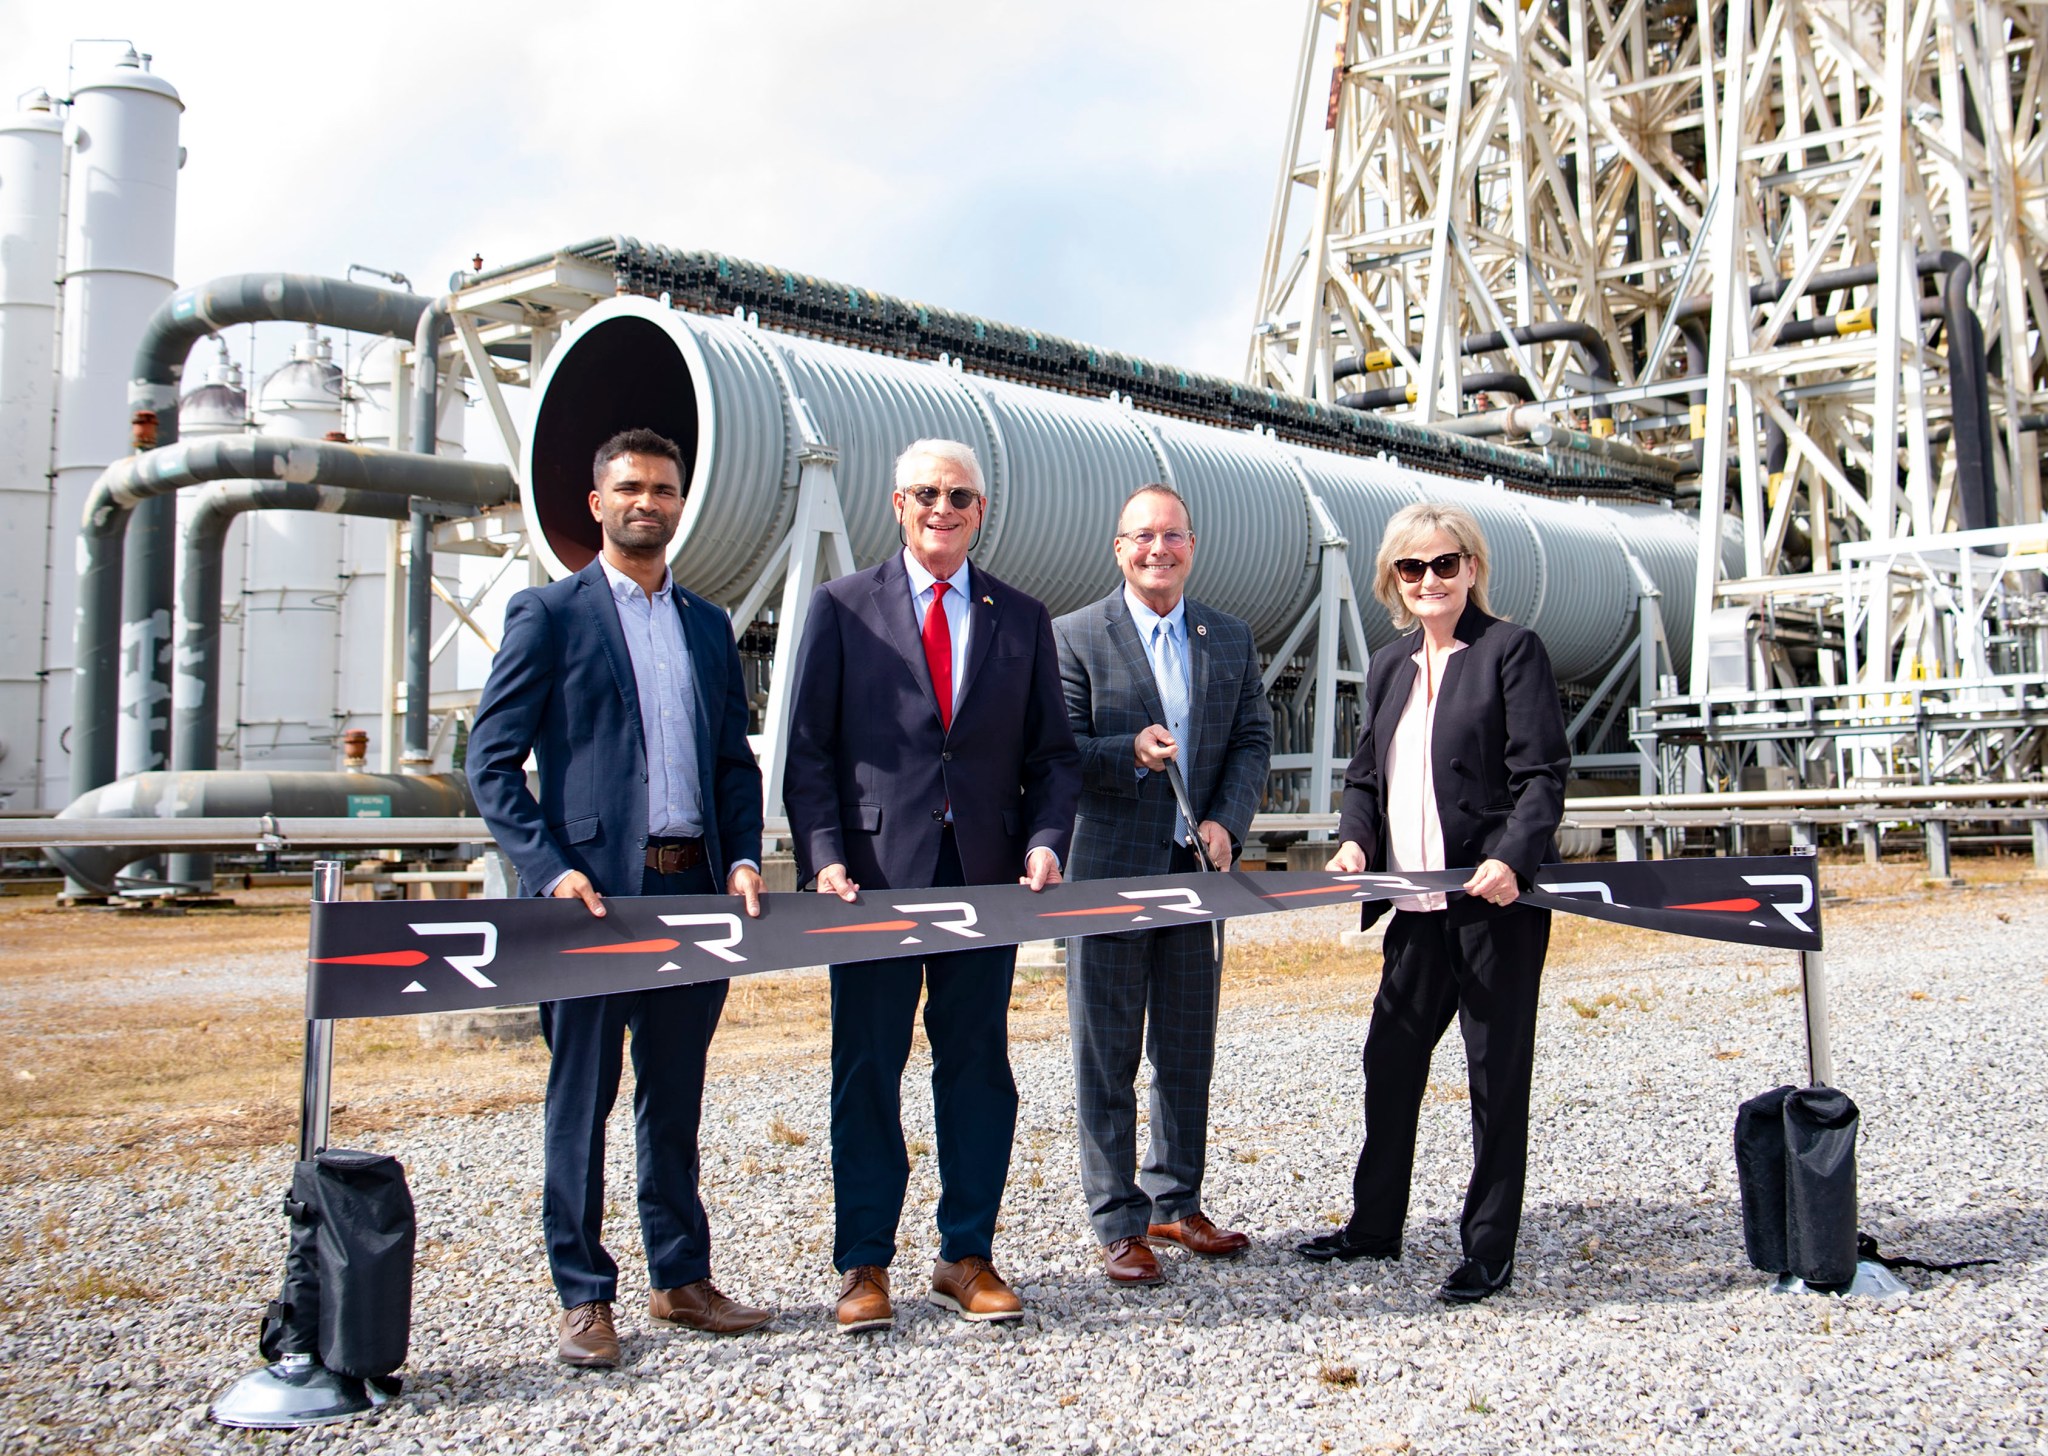 Officials prepare to cut the ribbon during a Nov. 4 ceremony marking an agreement for Rocket Lab USA